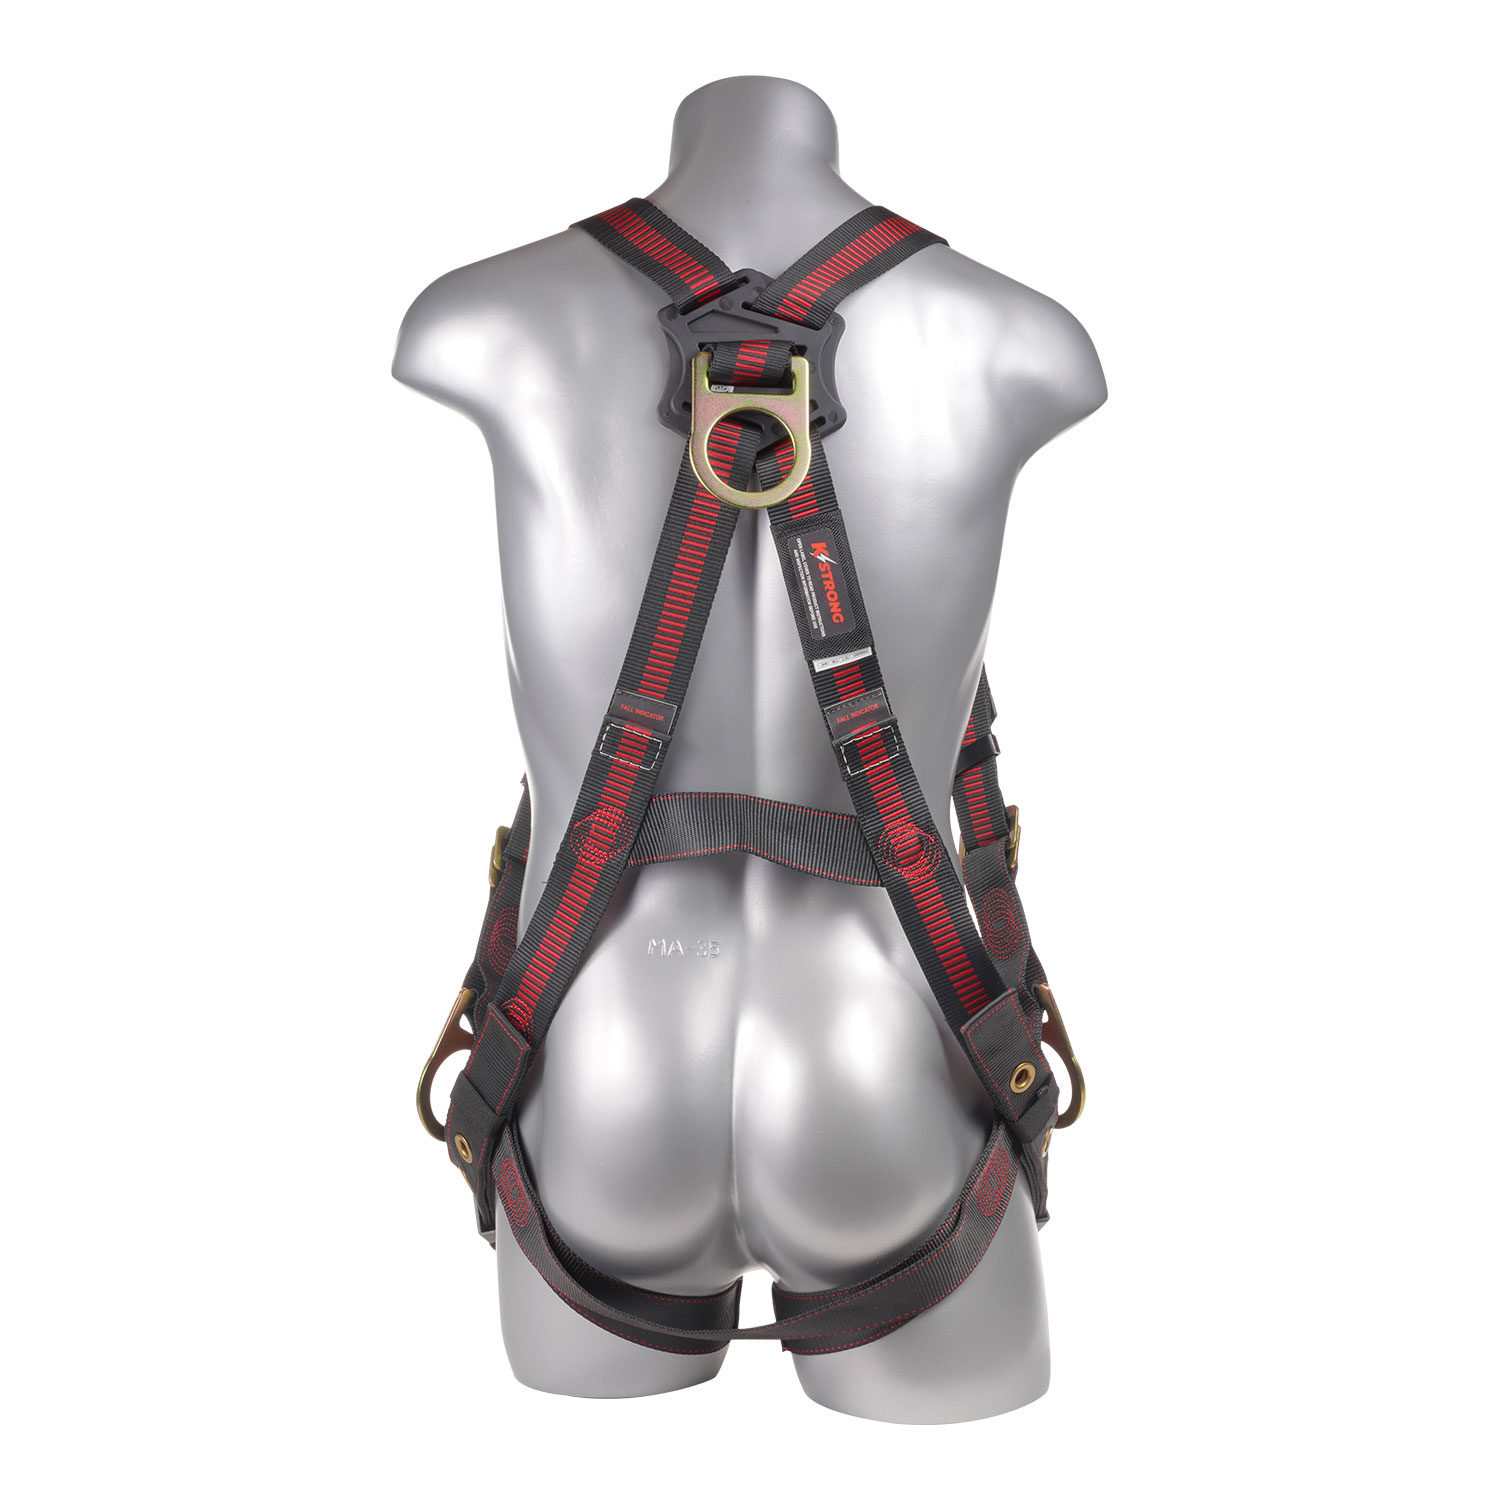 KStrong Kapture Elite 5-Point Full Body Harness, 3 D-Rings, TB Legs (ANSI), M/L, UFH10231G - Click Image to Close